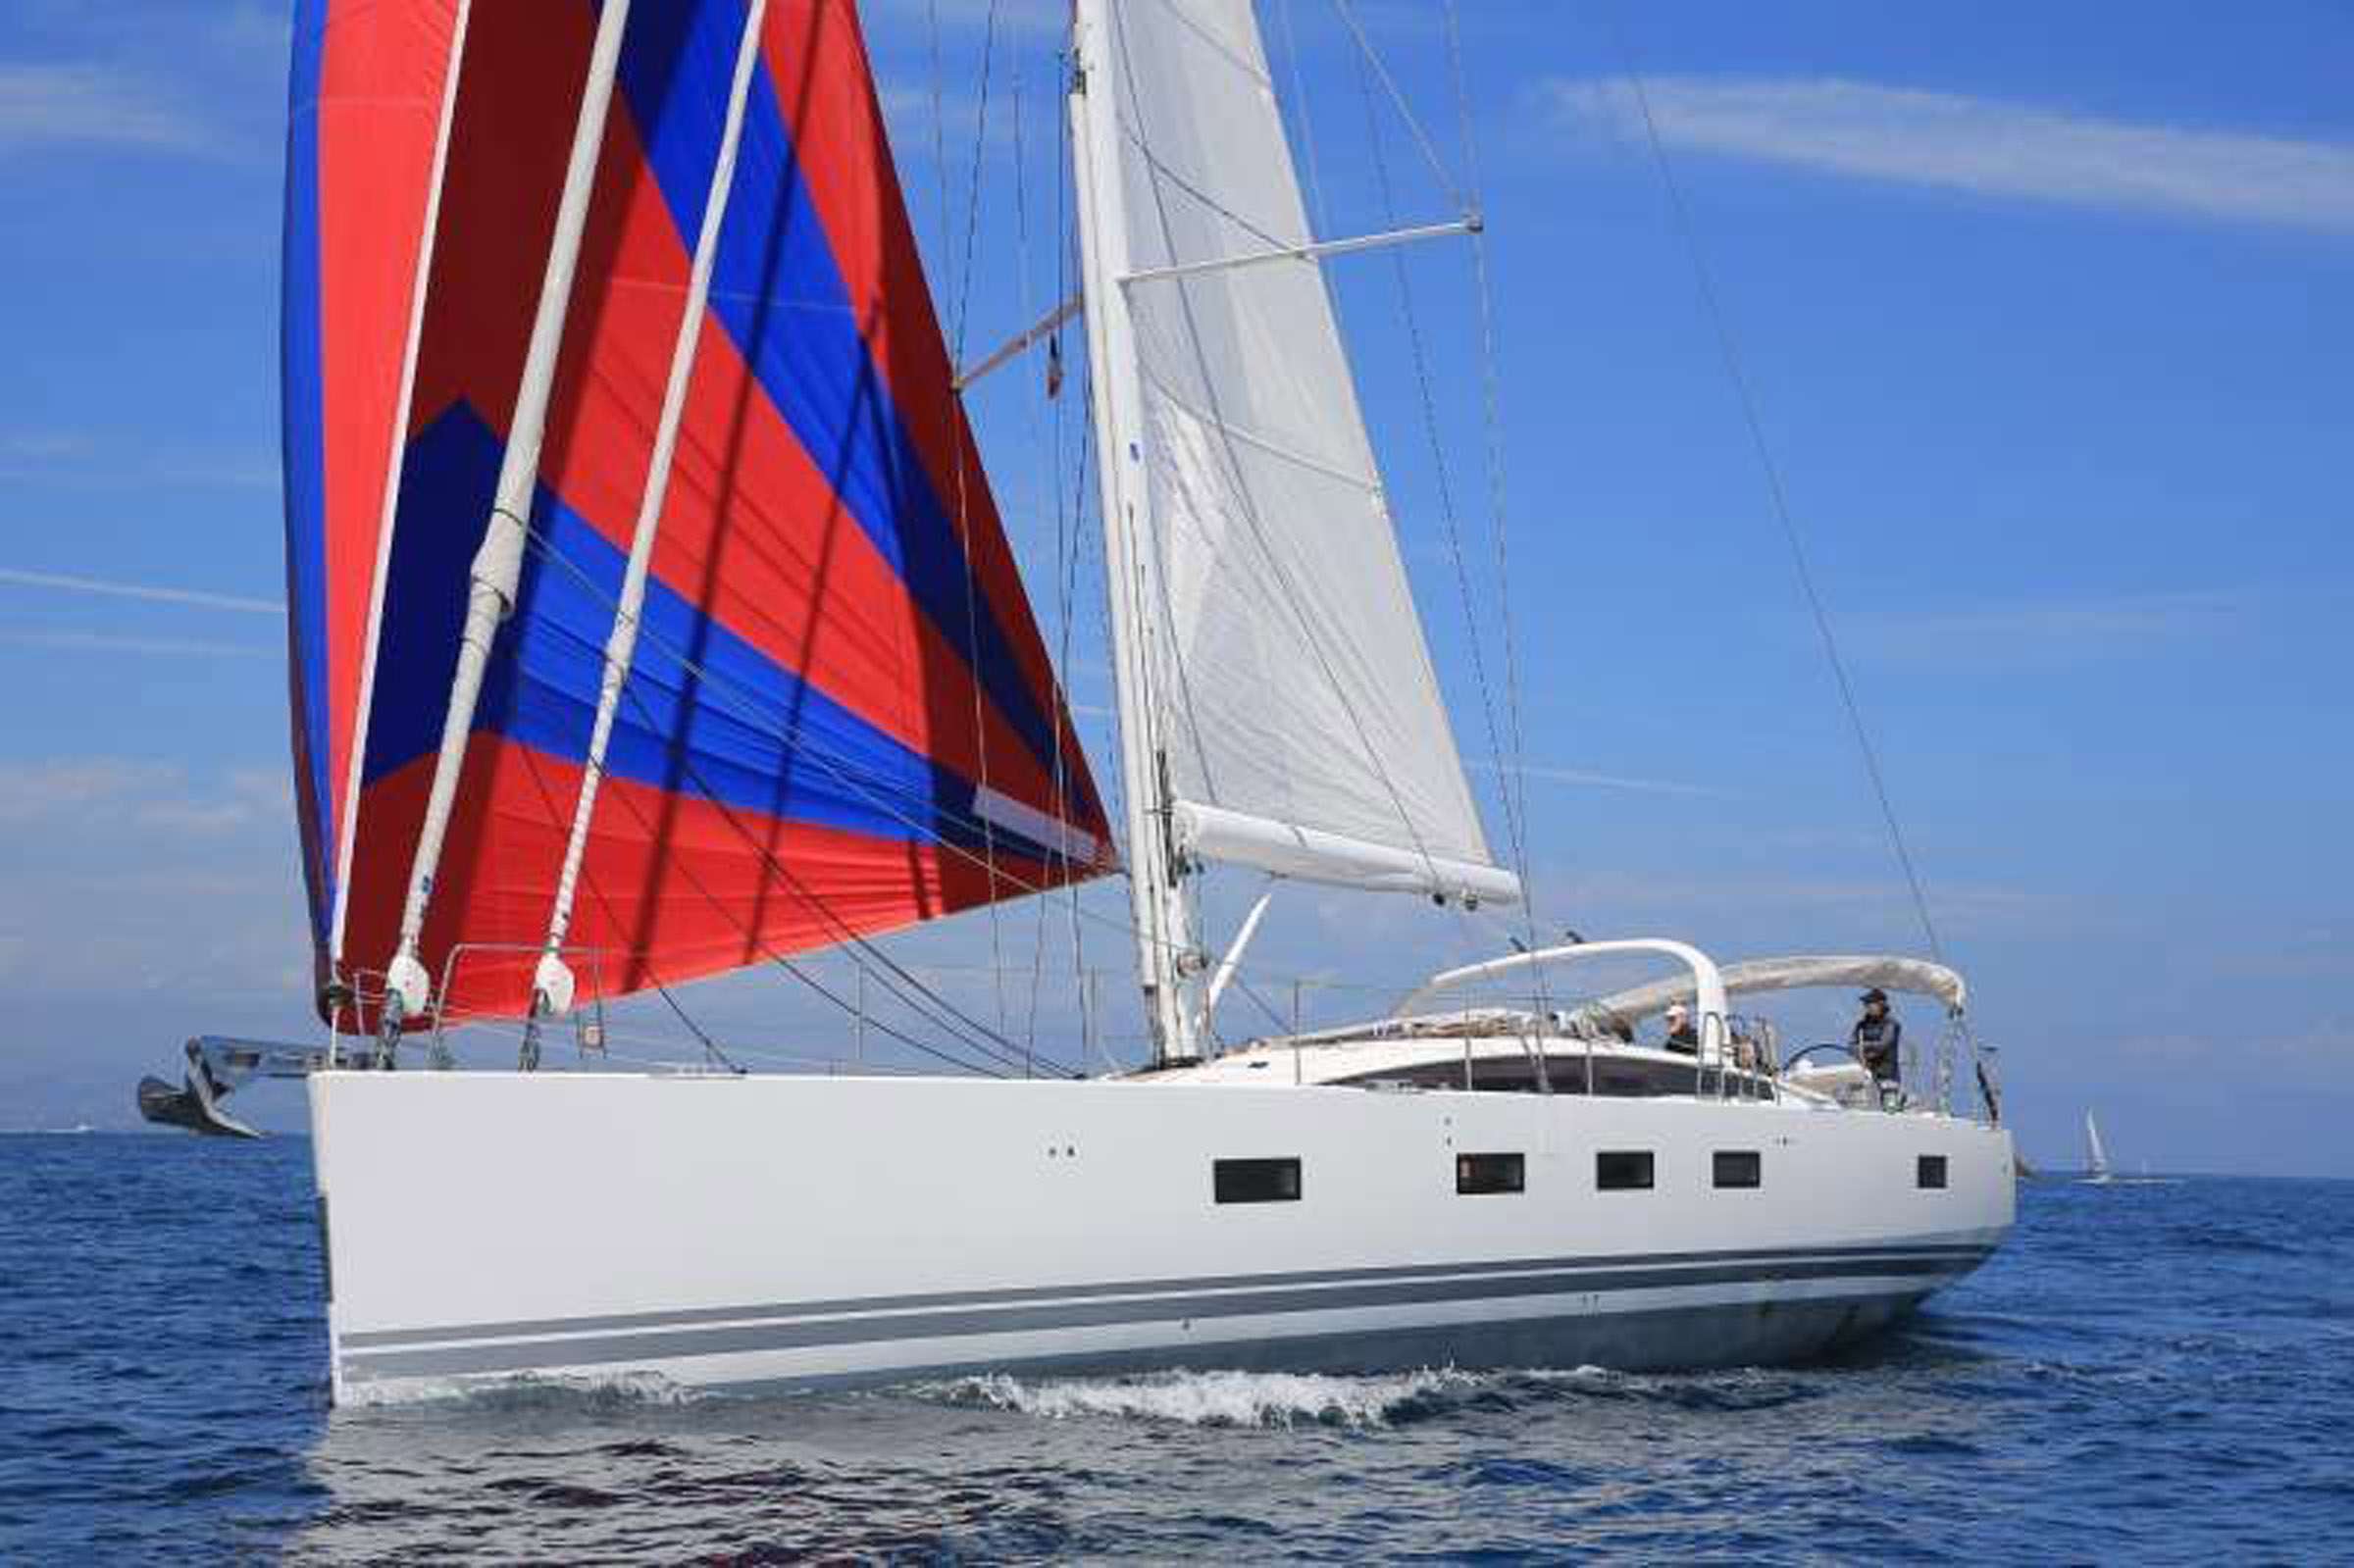 S/Y BALLADEER is Jeanneau&rsquo;s largest luxury sailing yacht with 3 en suite cabins.

Available for bookings of private yacht charter holidays in Croatia, she is a great hire boat for small families or yacht hire groups of up to 8 persons.